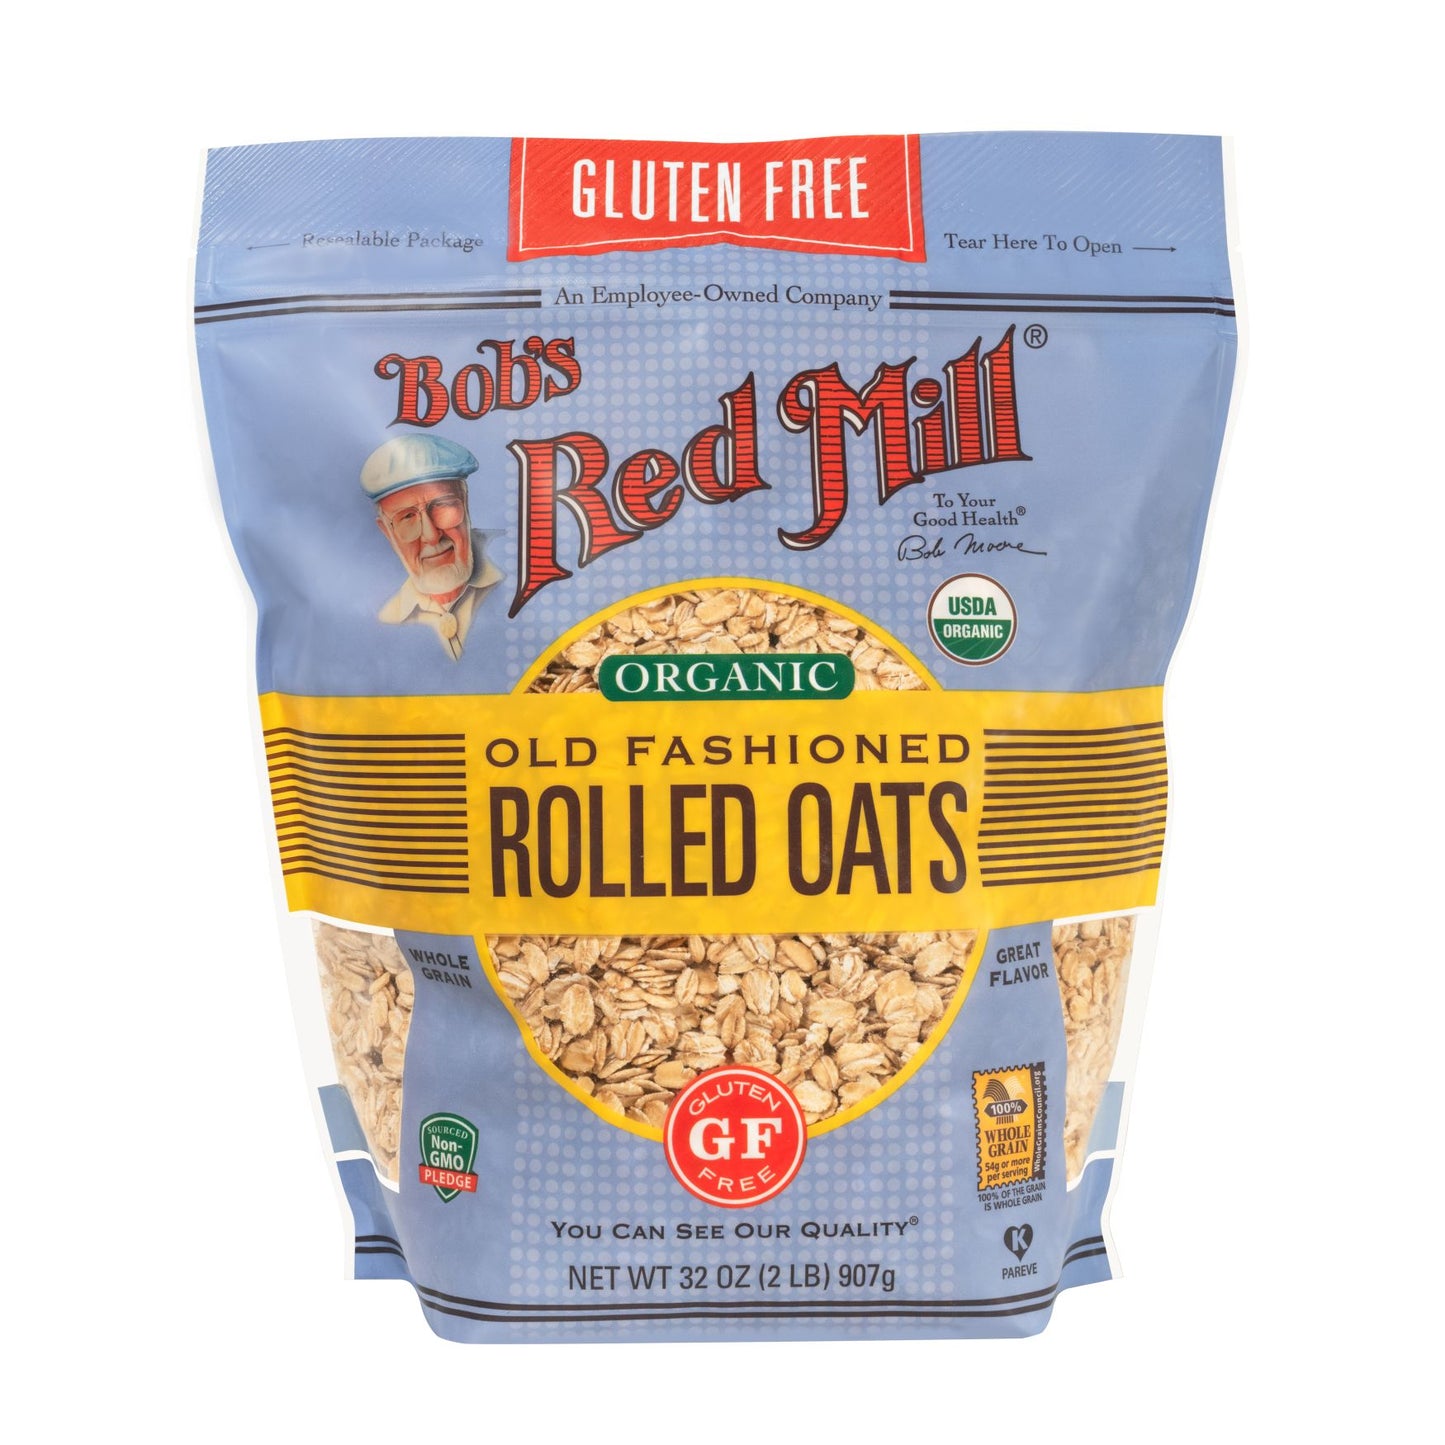 Bob's Red Mill Old Fashioned Rolled Oats 907g, Certified Organic & Wheat Free